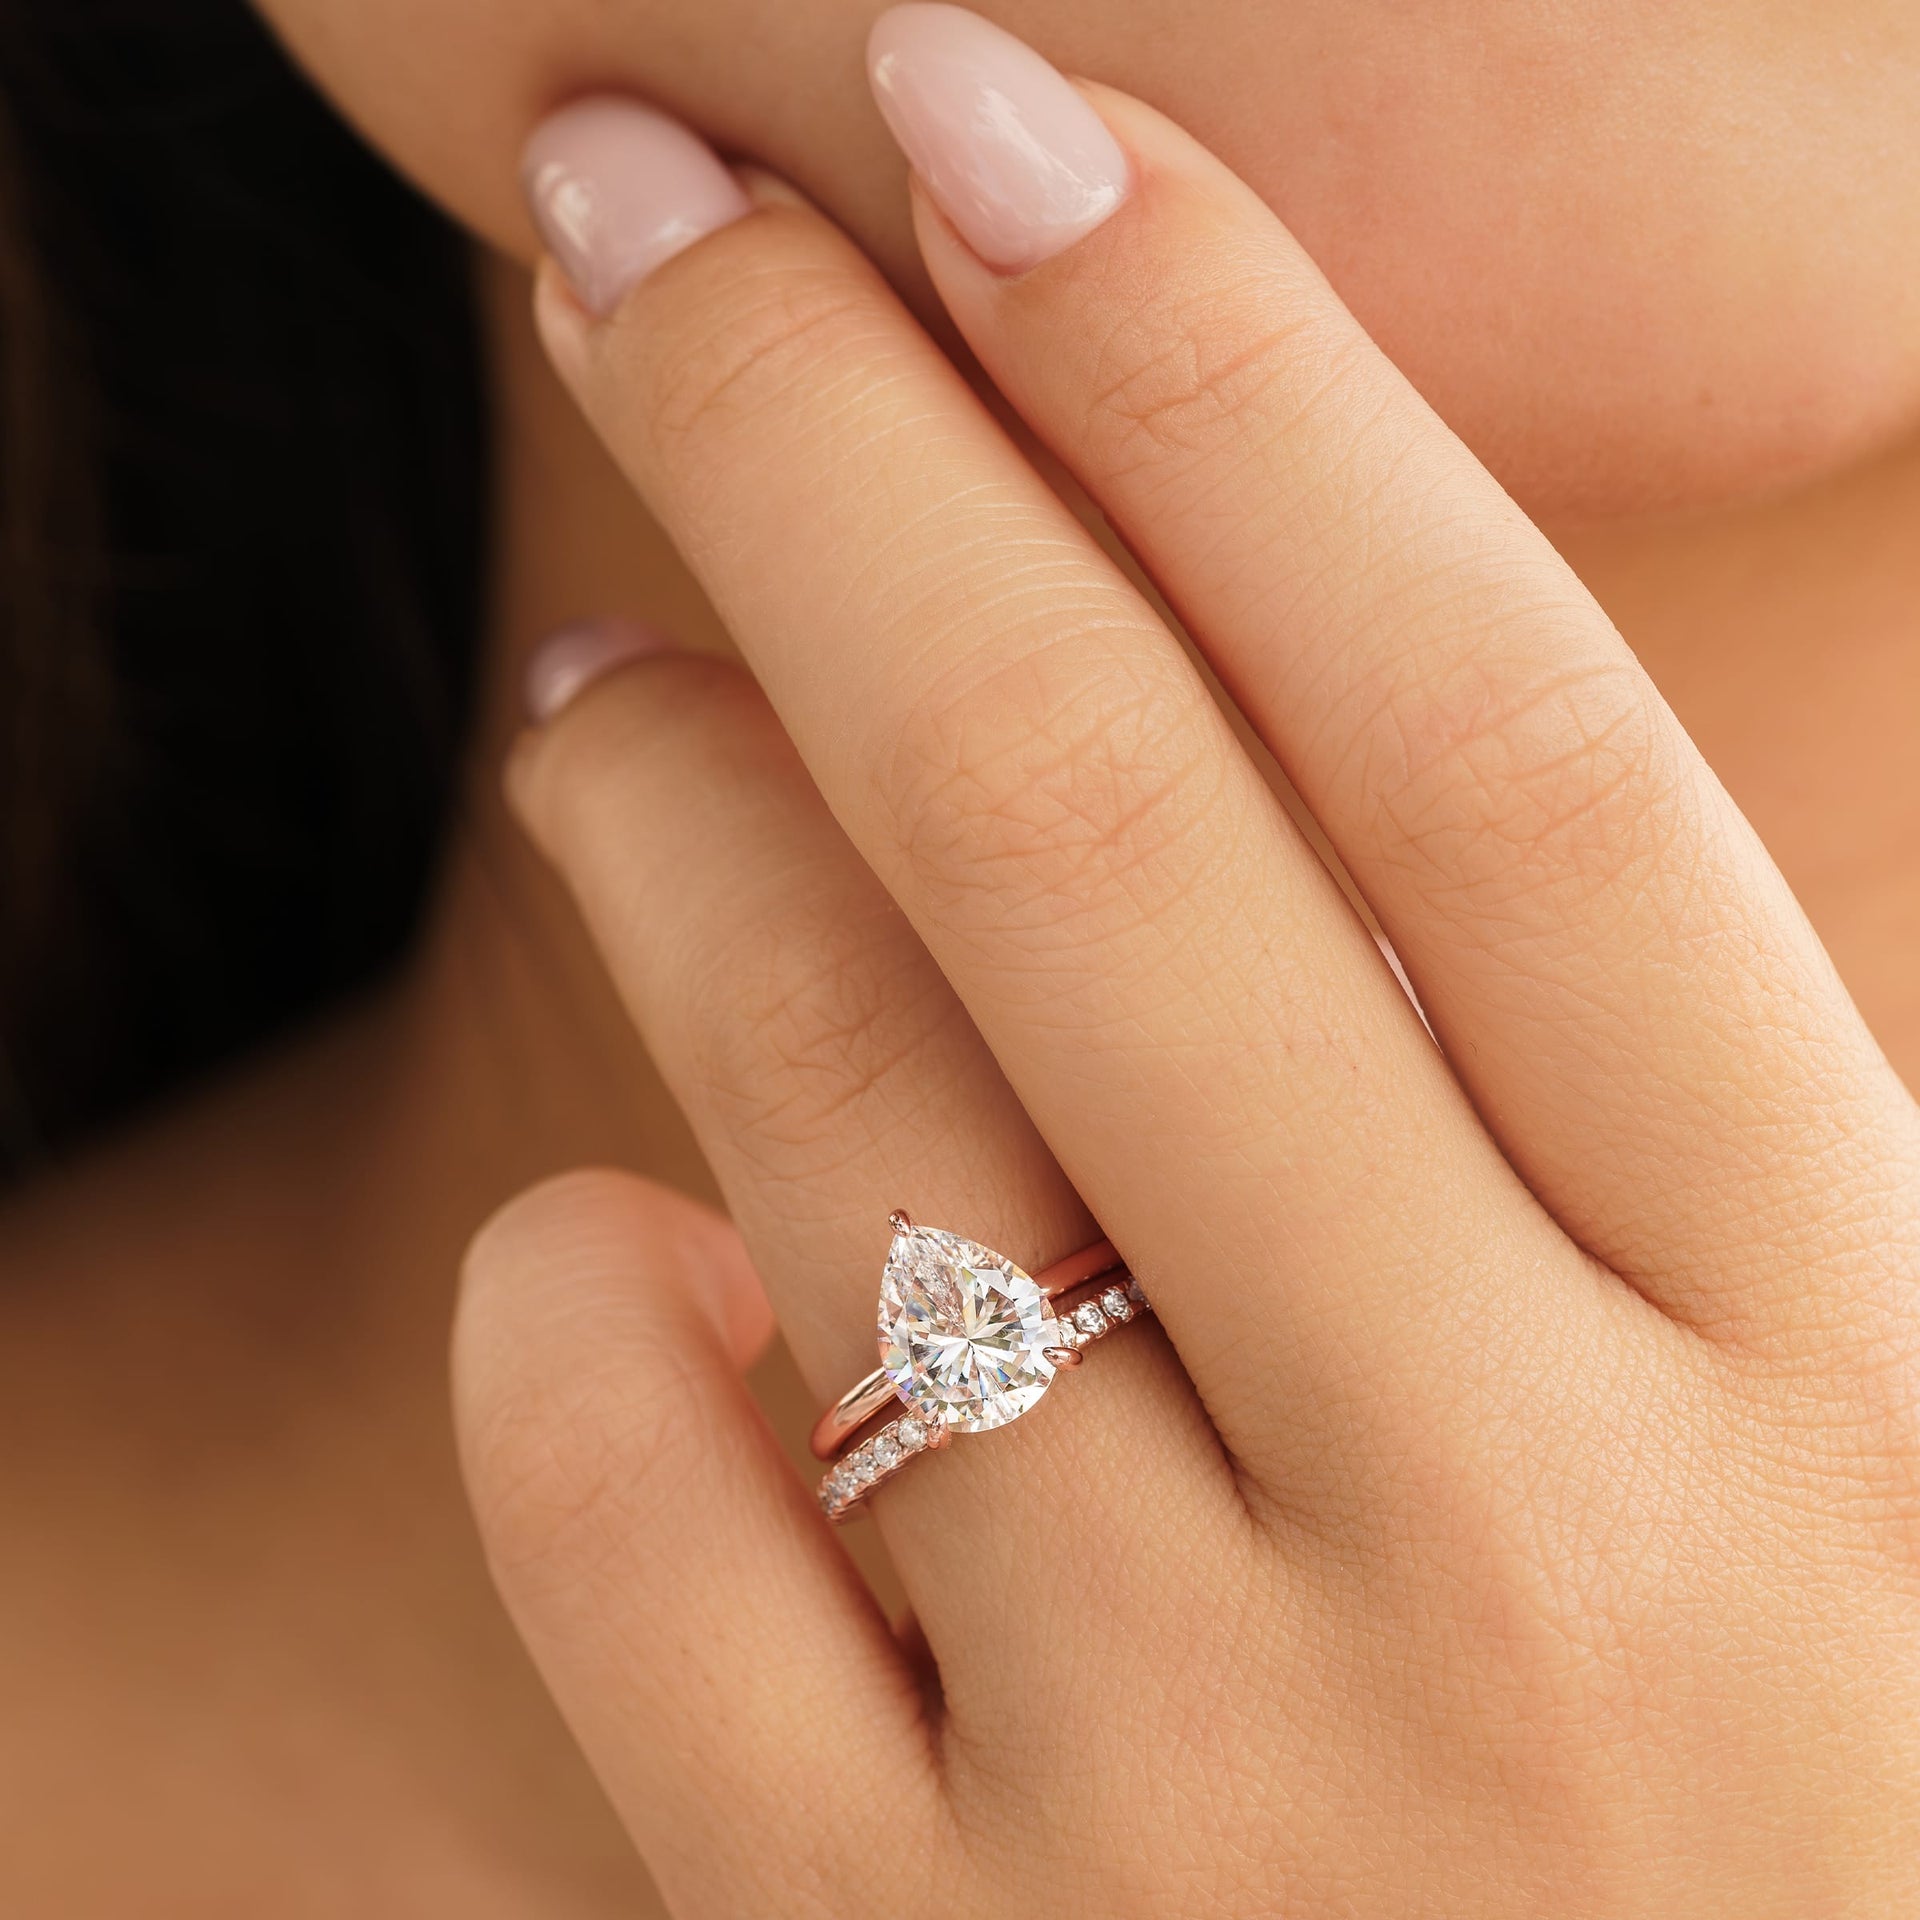 woman wearing pear shaped engagement ring with promise wedding band